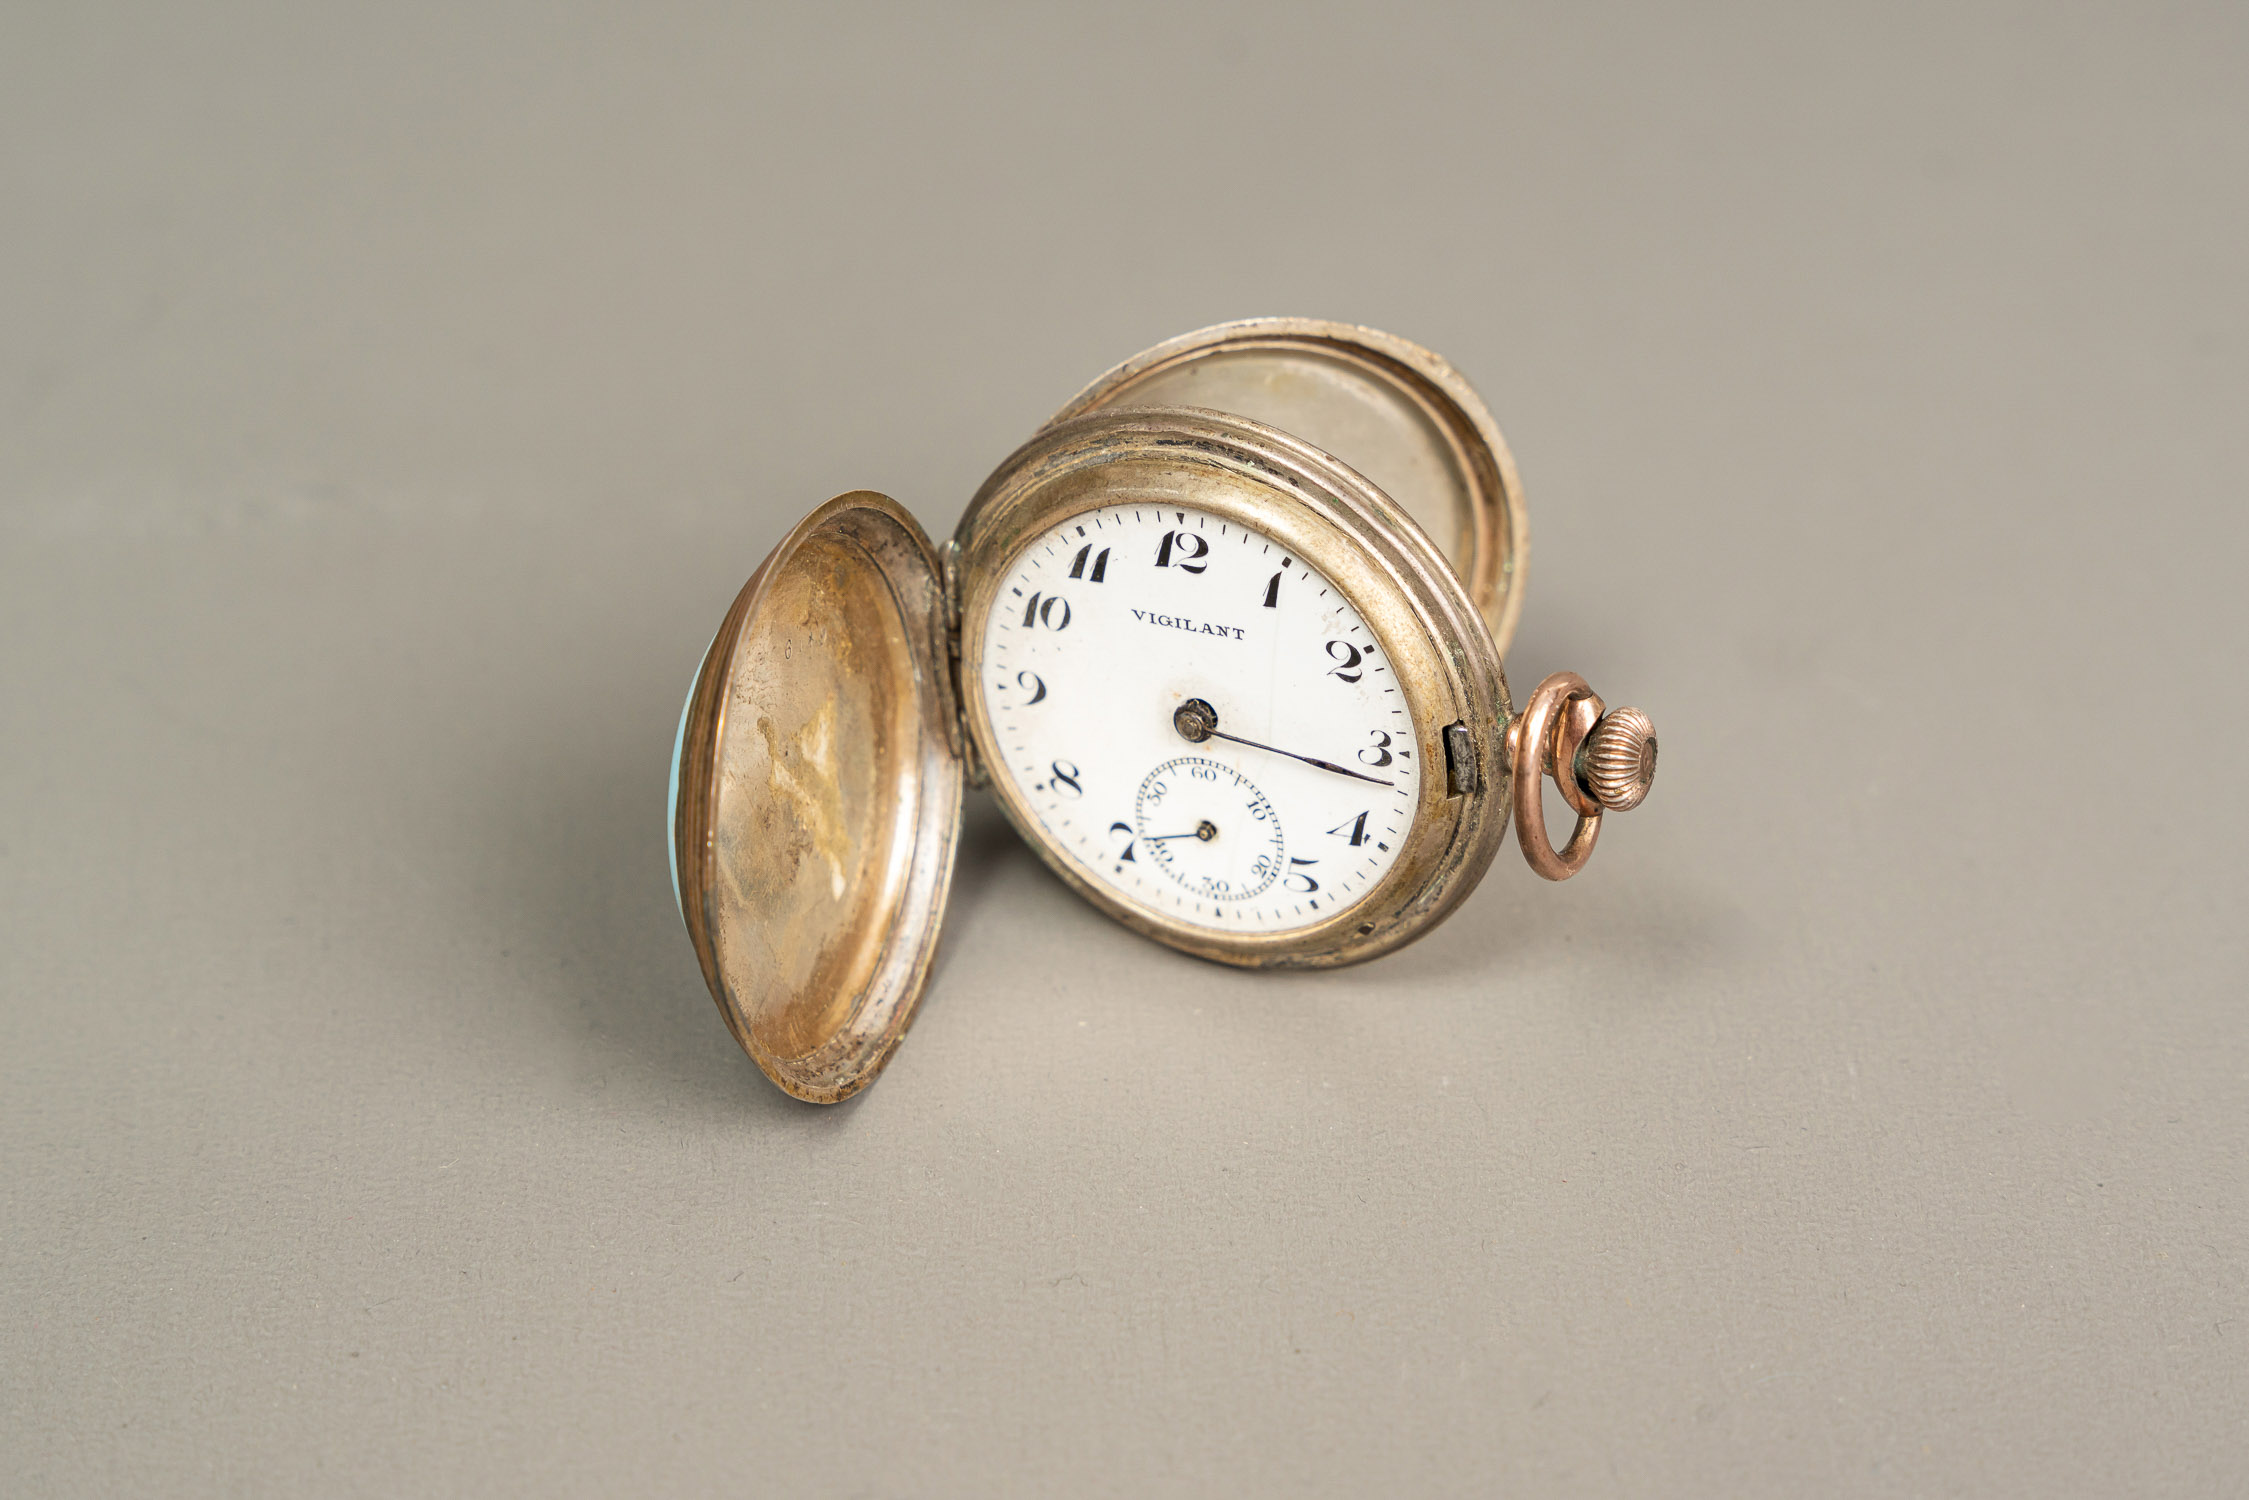 French Pocket Watch - Image 2 of 3